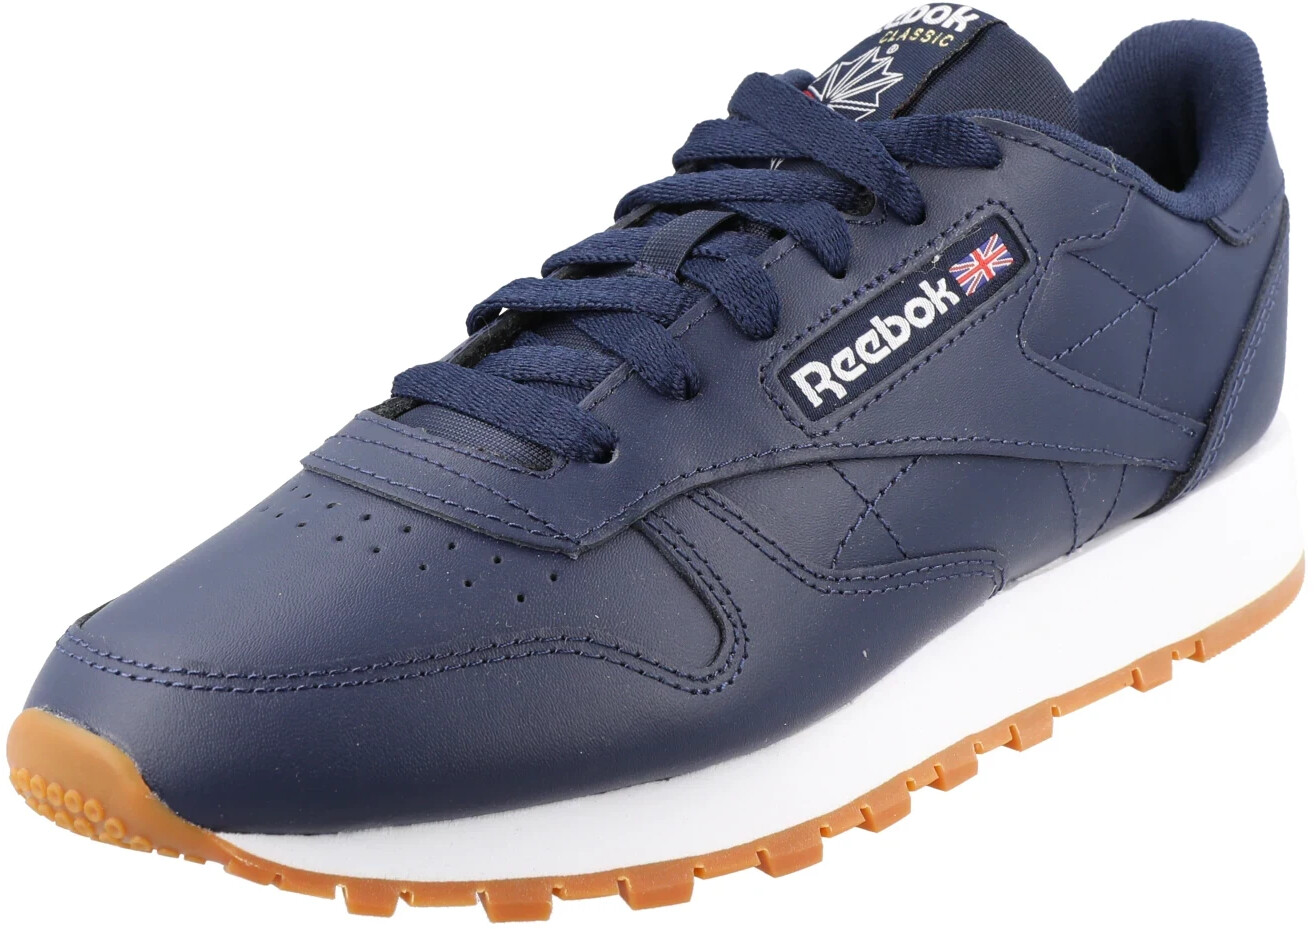 Reebok Royal Complete Sport Shoes in Cloud White/Vector Navy/Cloud